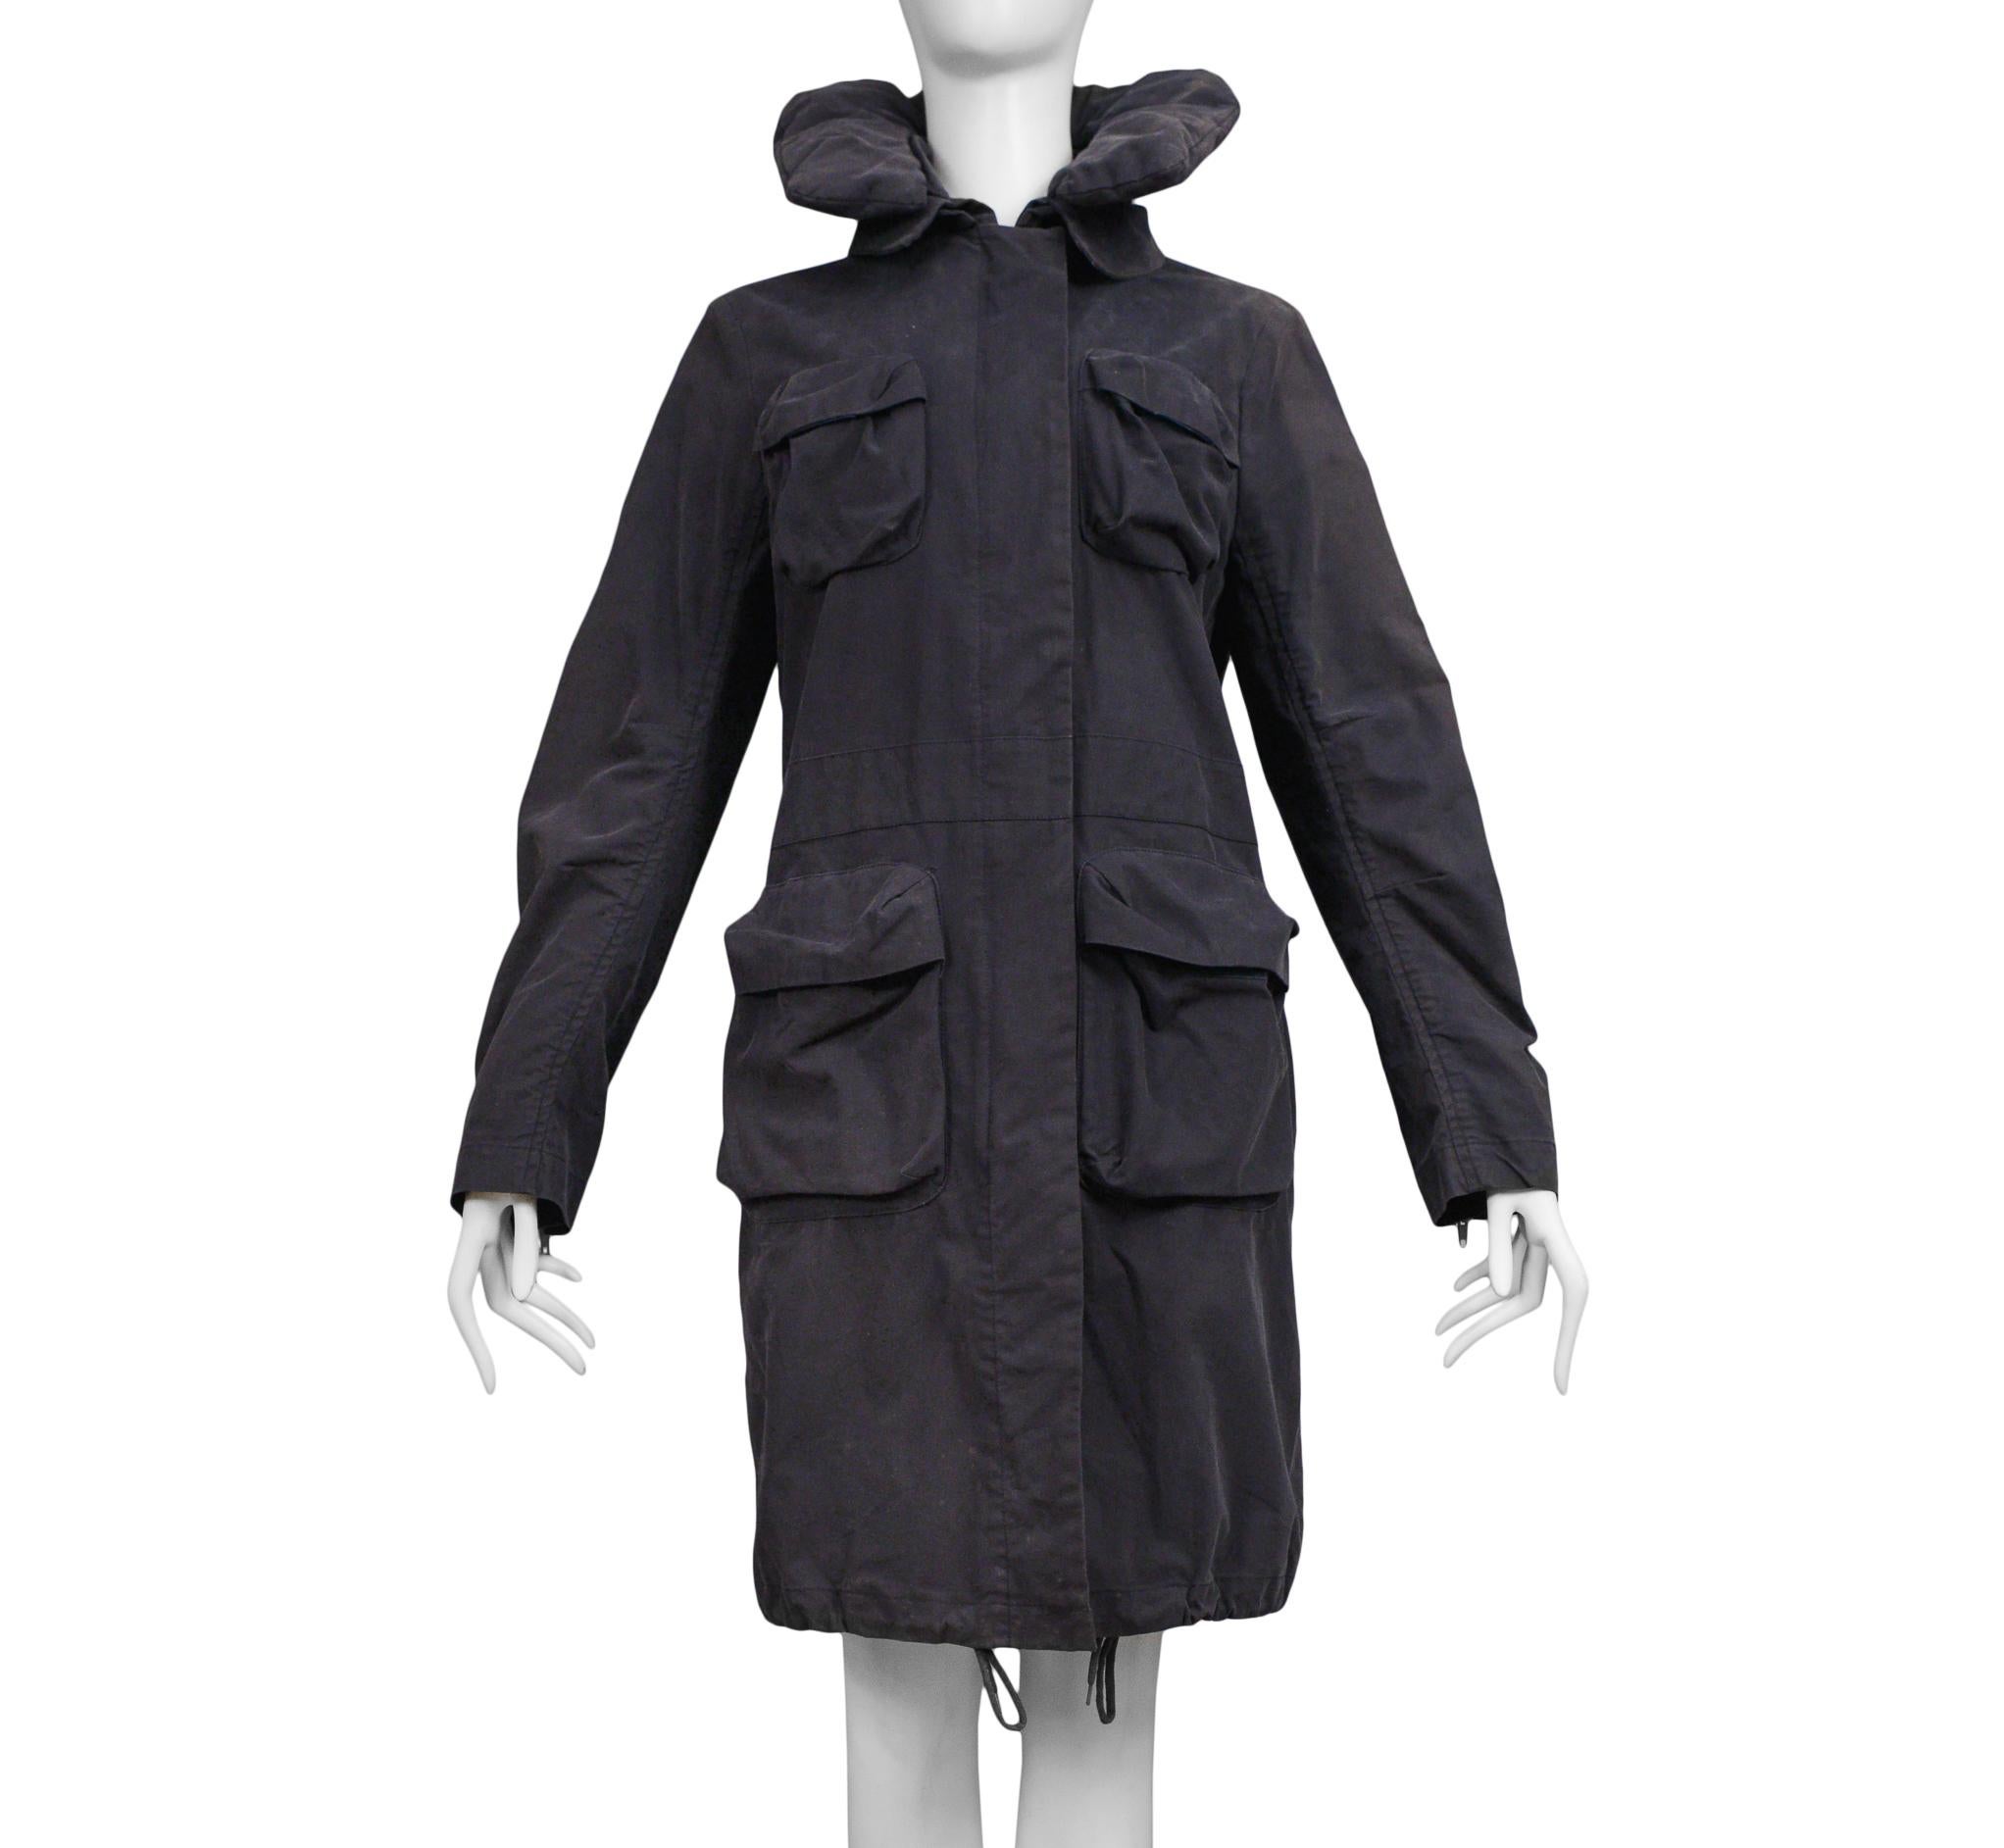 Resurrection Vintage is excited to offer a vintage Helmut Lang navy blue cotton four-pocket coat with a stowaway hood, detachable pillow collar, and internal bondage straps. Collection 2000. Some slight fading.

Helmut Lang 
Size 40
Measurements :